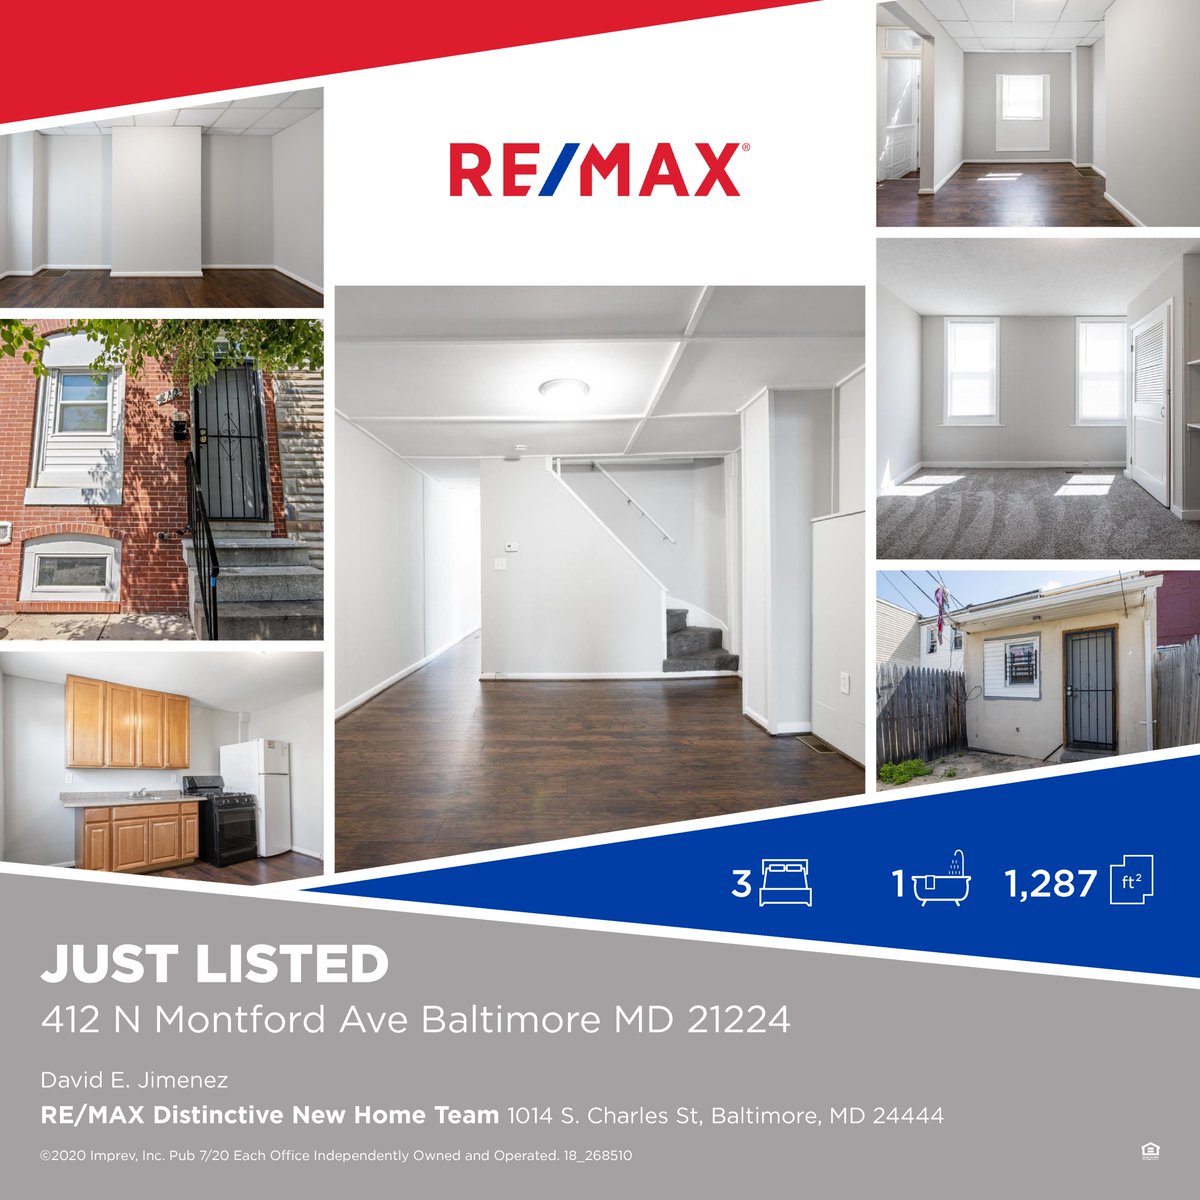 Just Listed. 412 N. Montford Ave, Baltimore, MD, 21224. 
Contact us today to schedule a viewing. 

#justlisted #newonthemarket #newlisting #maryland #VA #remax #remaxdistinctive #livingroom #newonthemarket #forsale #realestate #realtor #baltimore #baltimorecounty